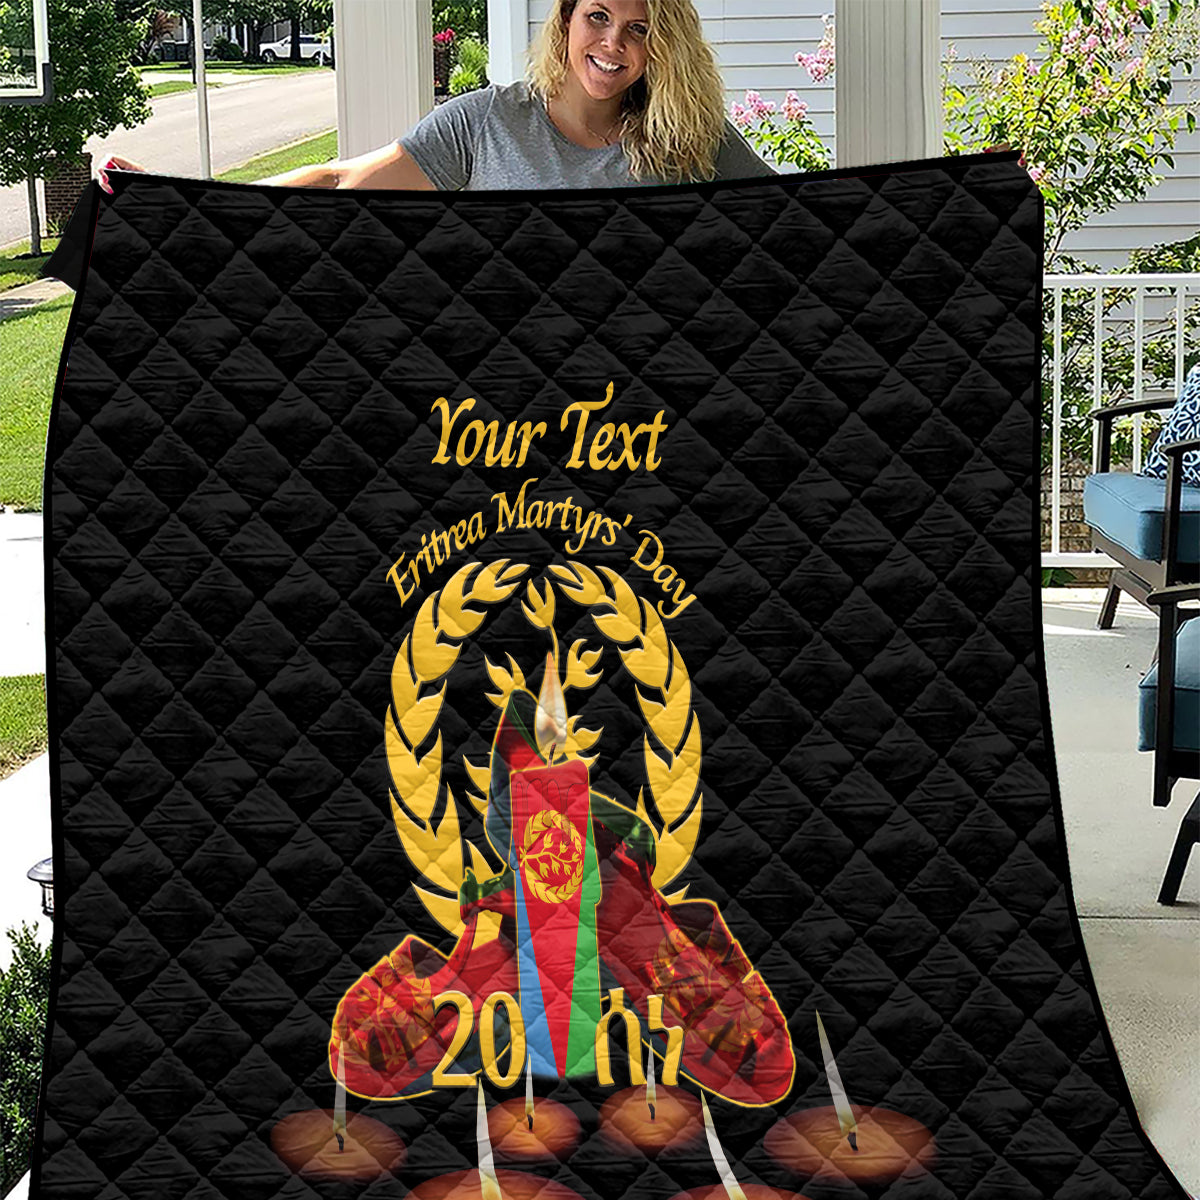 Custom Eritrea Martyrs' Day Quilt 20 June Shida Shoes With Candles - Black